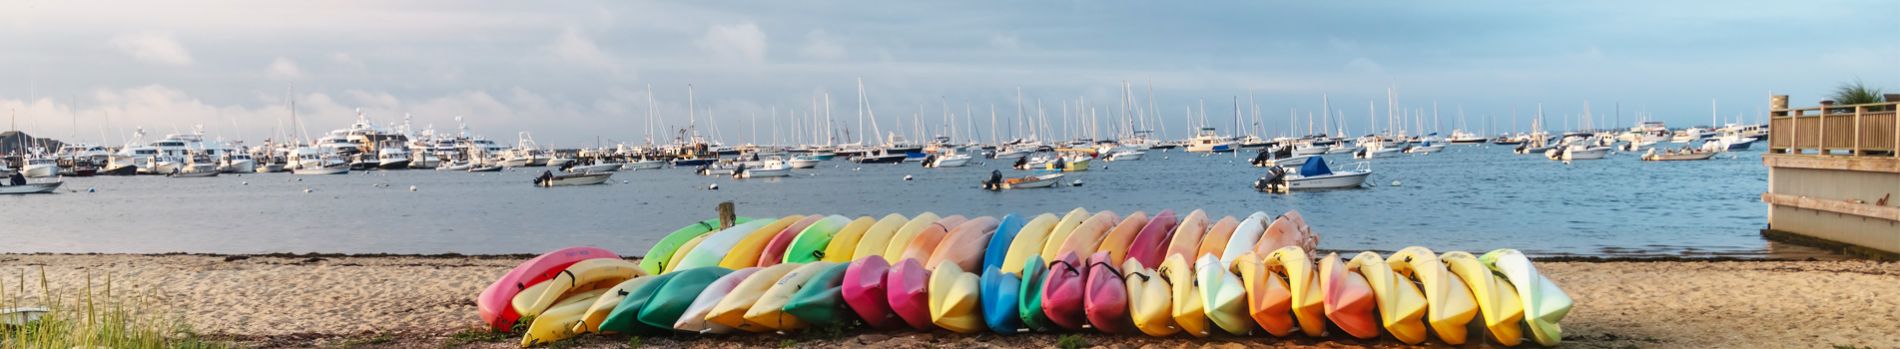 Kayaks stacked on edge across the beach with boats anchored in the marina in the background